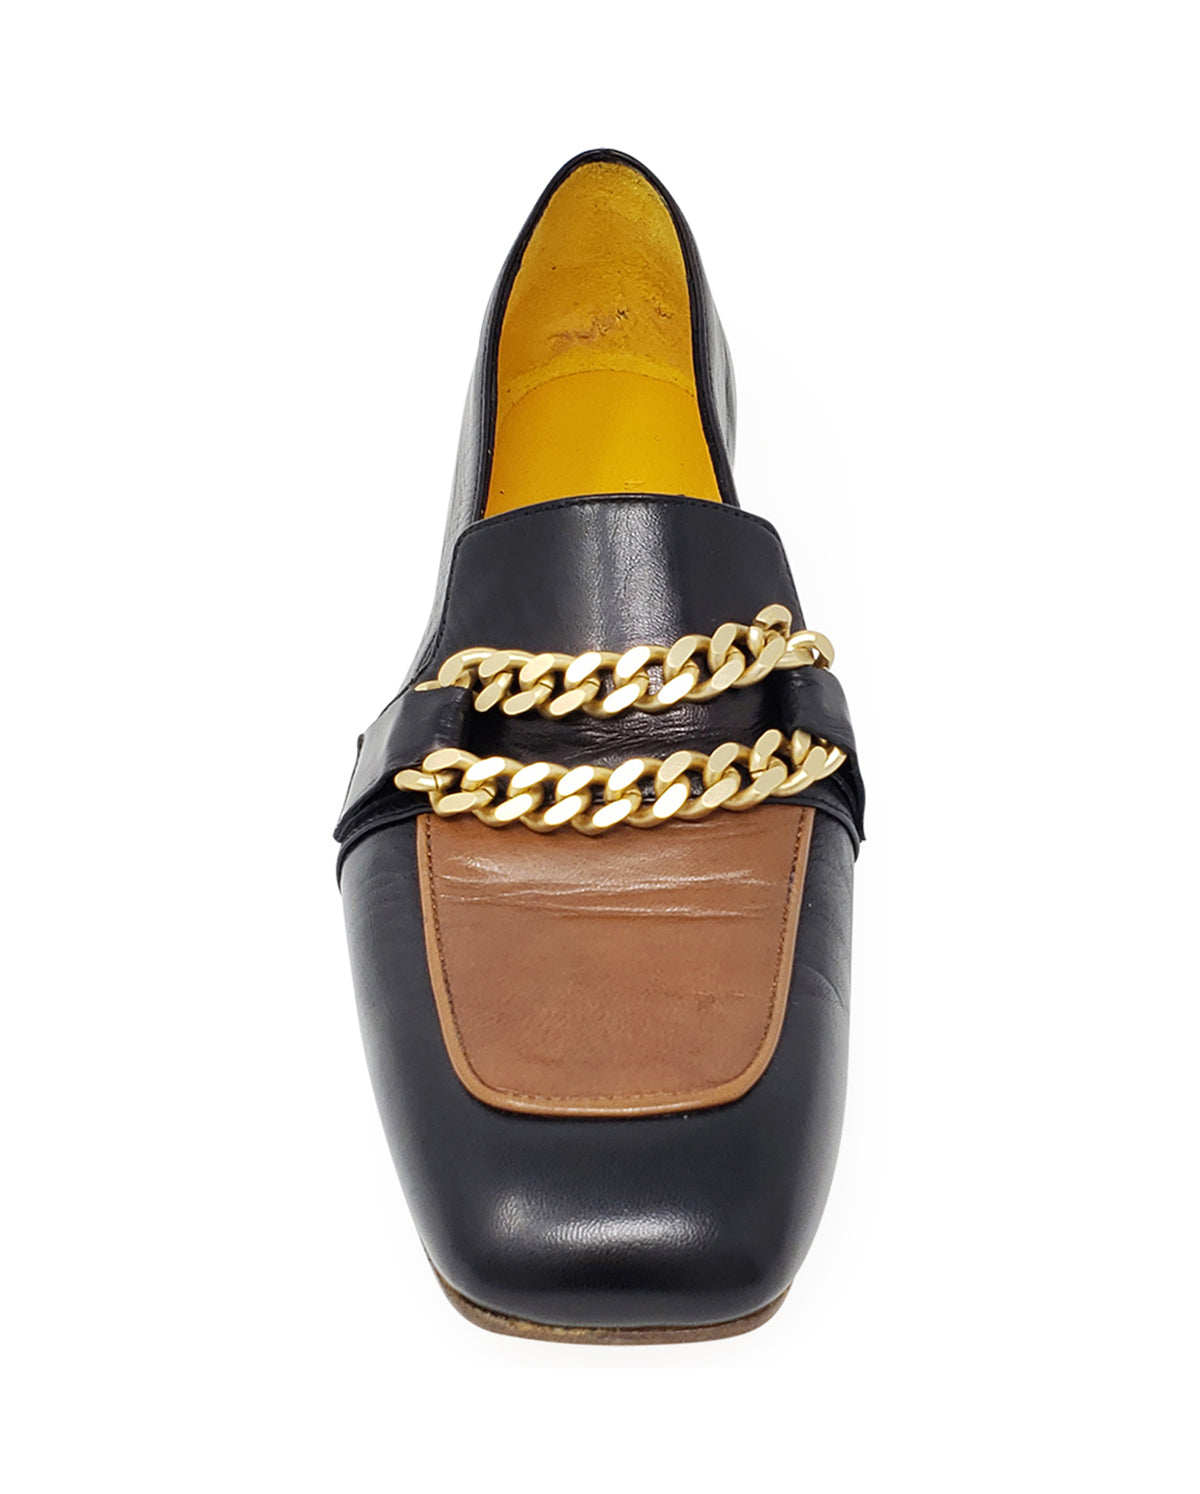 Two-Tone Loafer With Chain